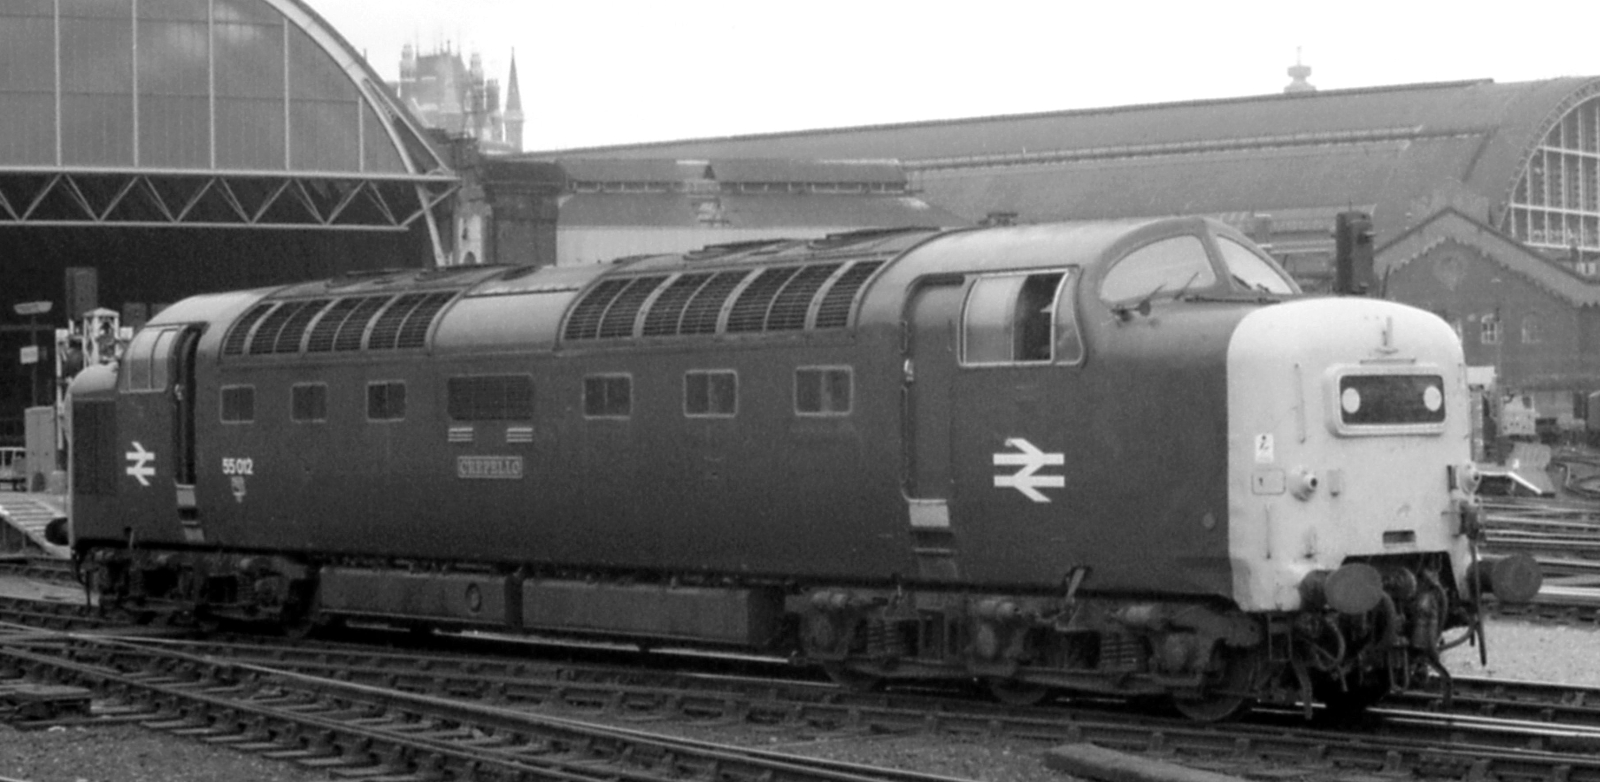 55012 in 1976 at London King's Cross